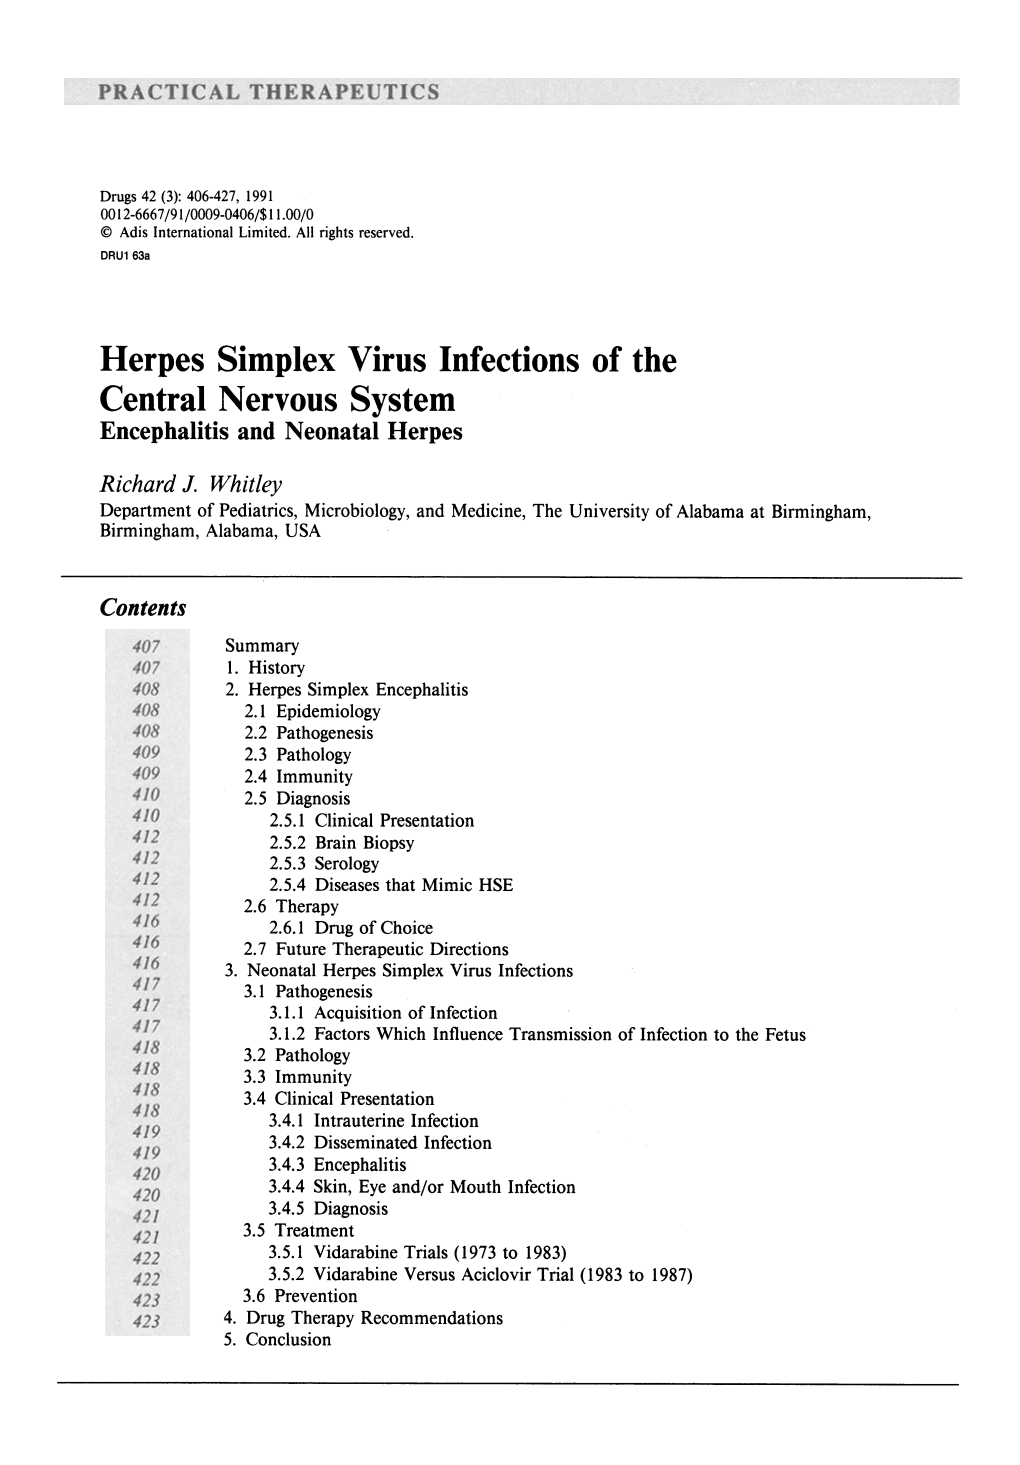 Herpes Simplex Virus Infections of the Central Nervous System Encephalitis and Neonatal Herpes